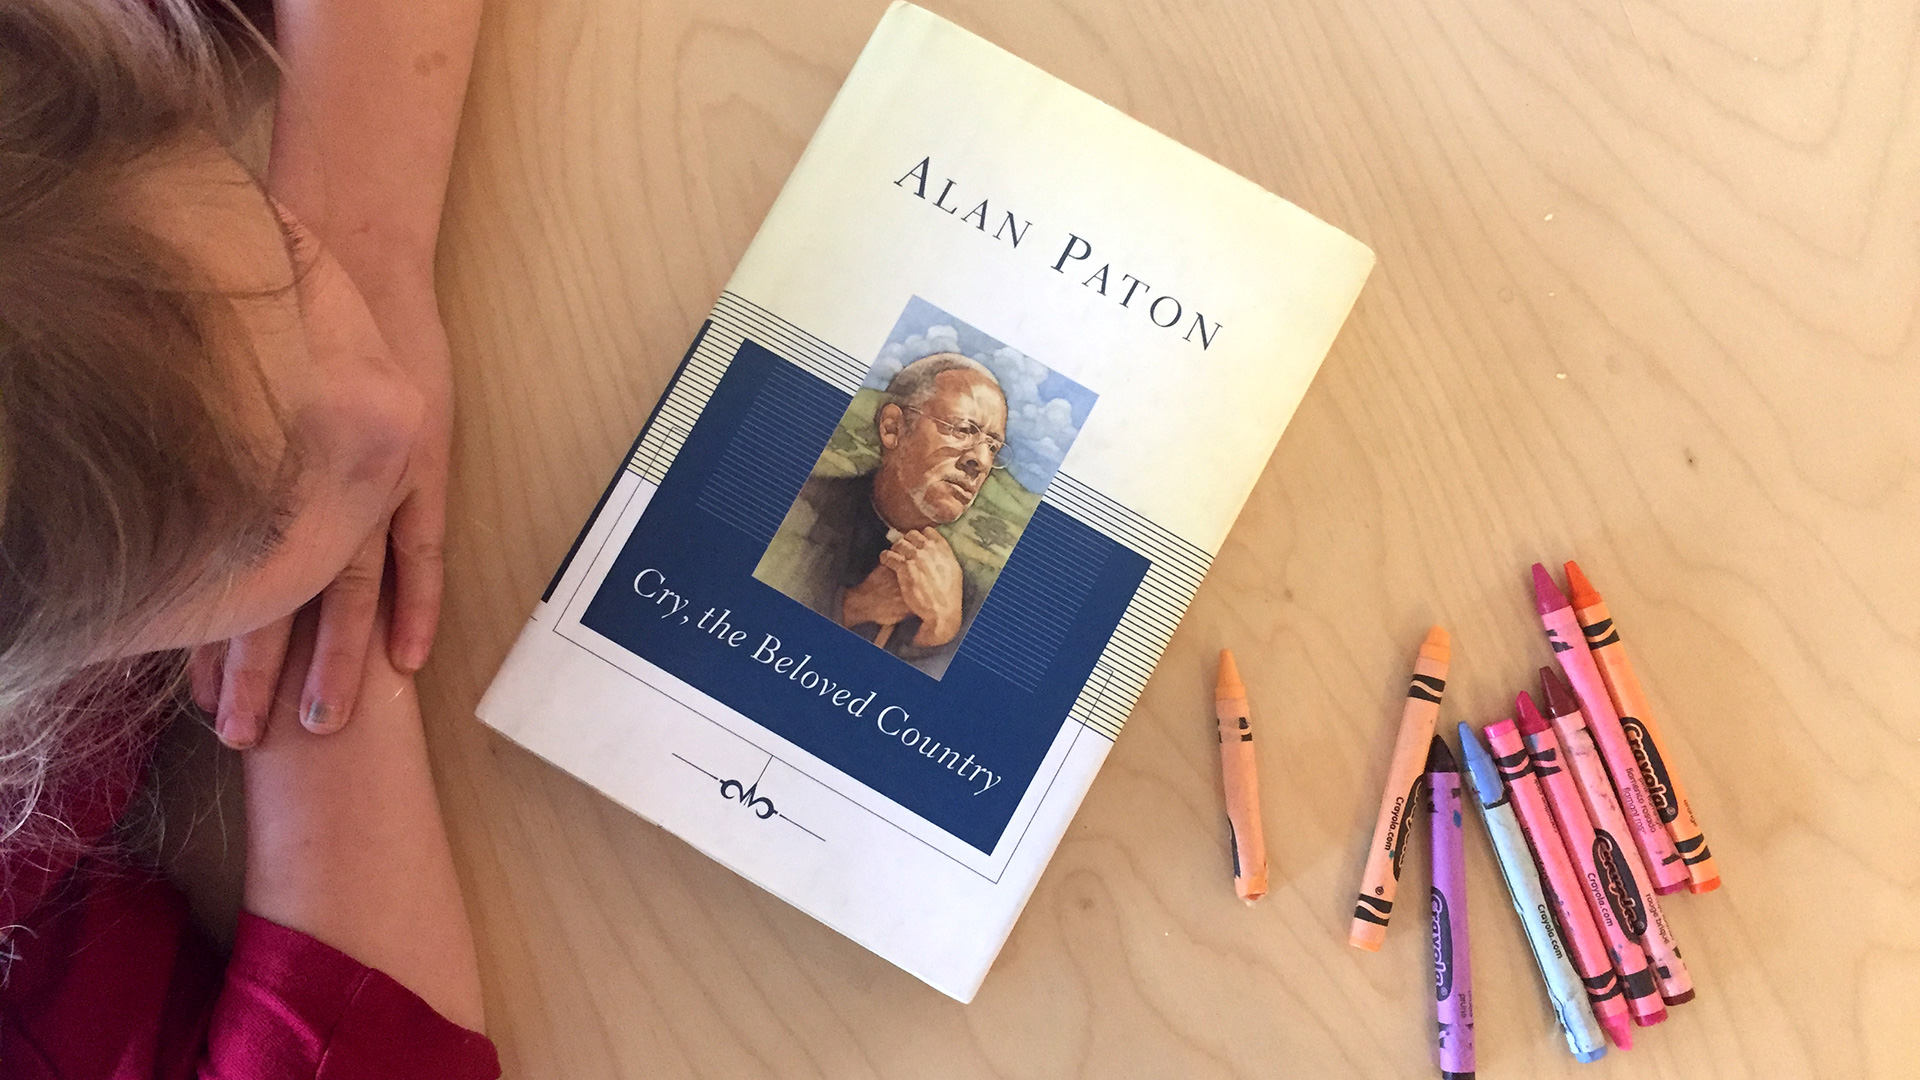 Cry, the Beloved Country by Alan Paton